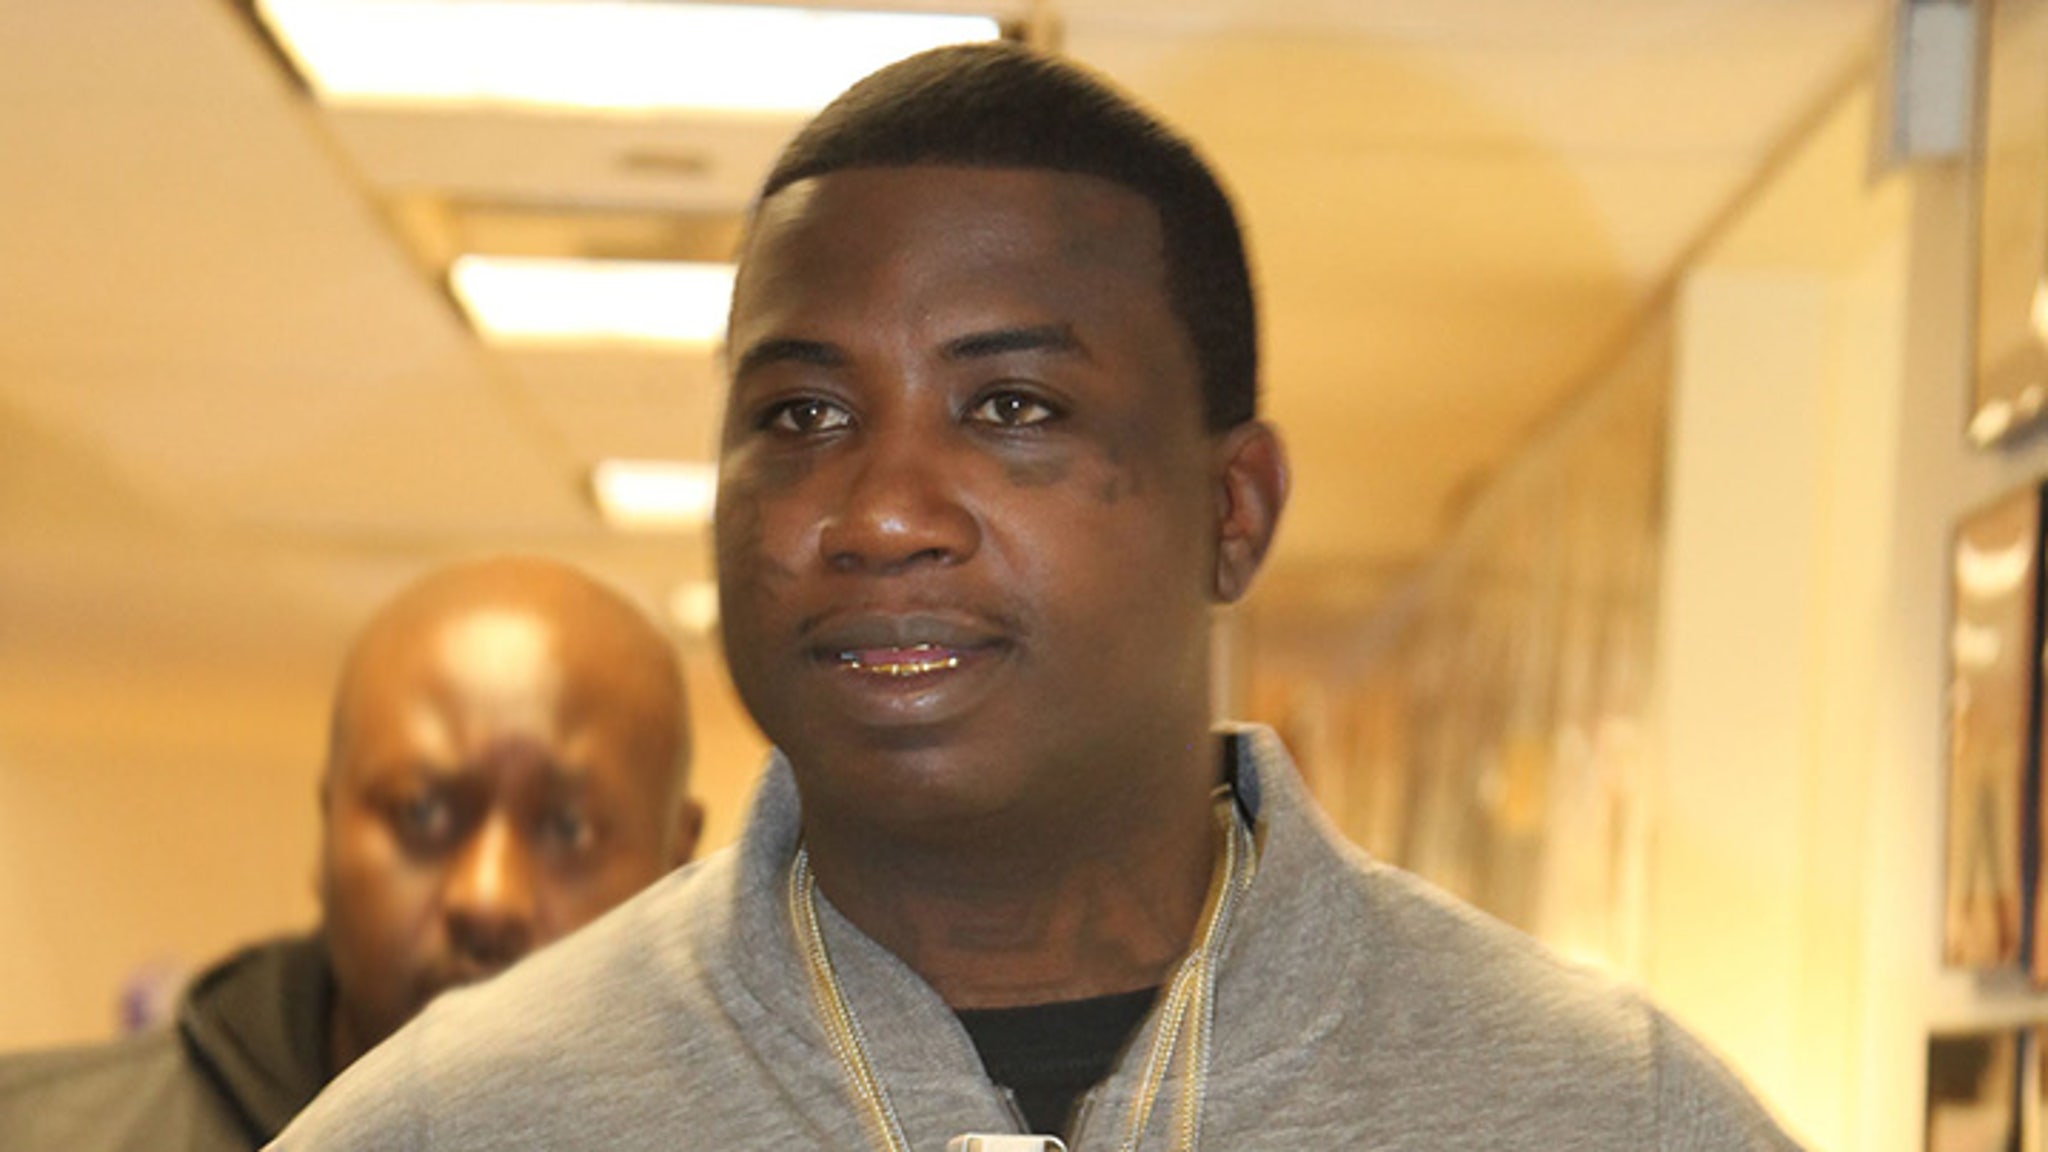 Karen Civil - The latest photo of Gucci Mane from jail, with his